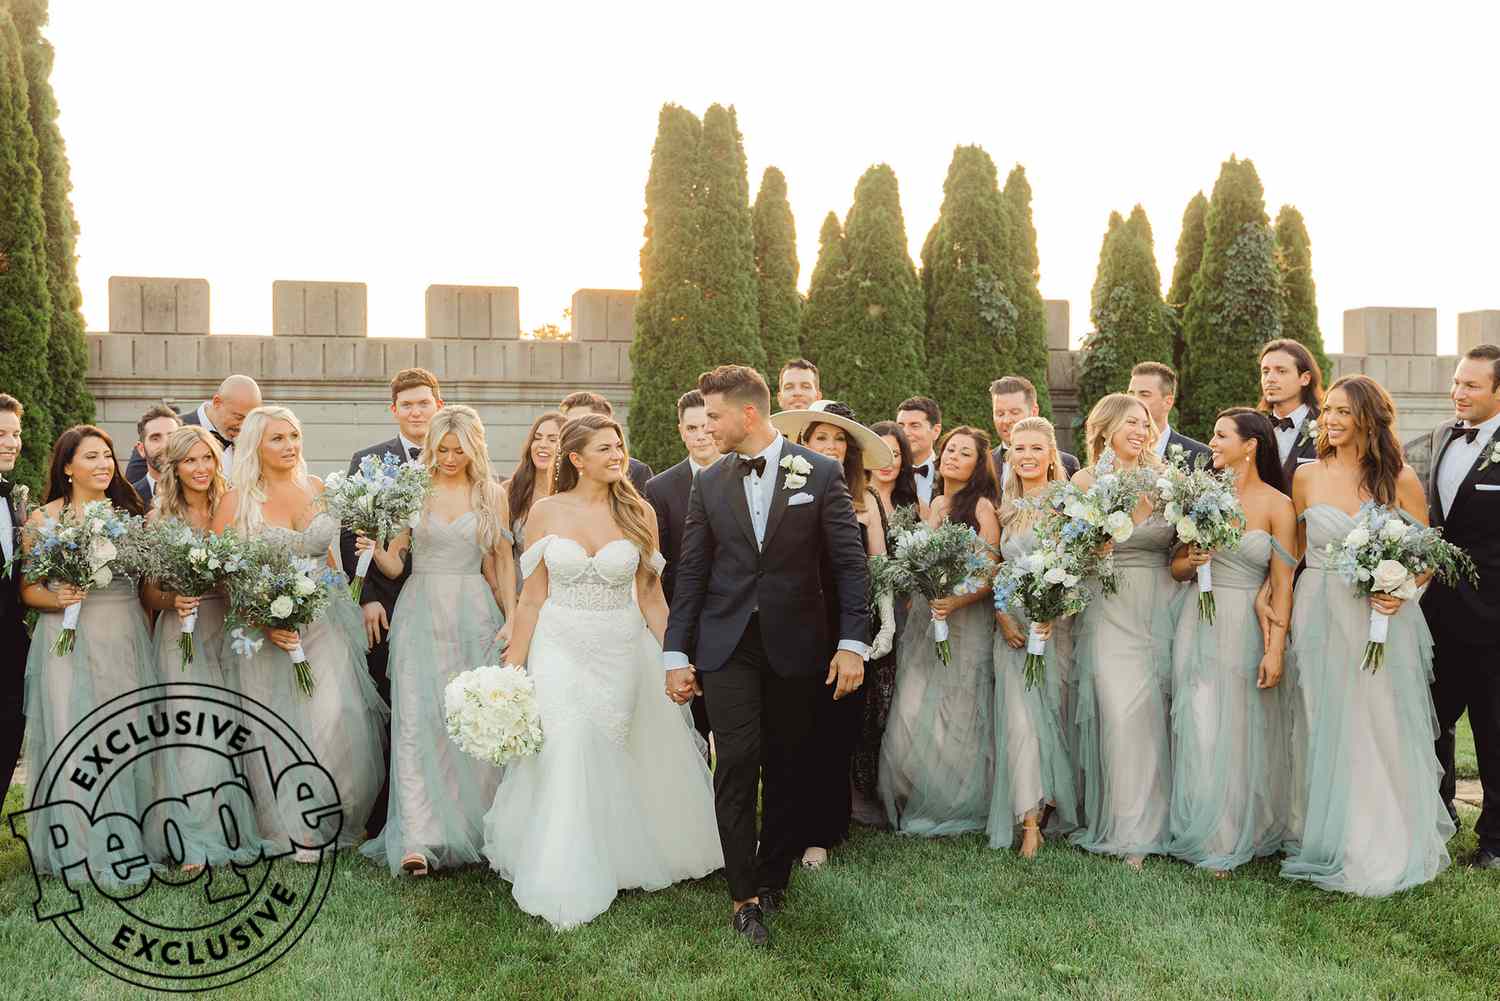 Brittany Cartwright and Jax Taylor married, with many of their castmates attending the wedding. 